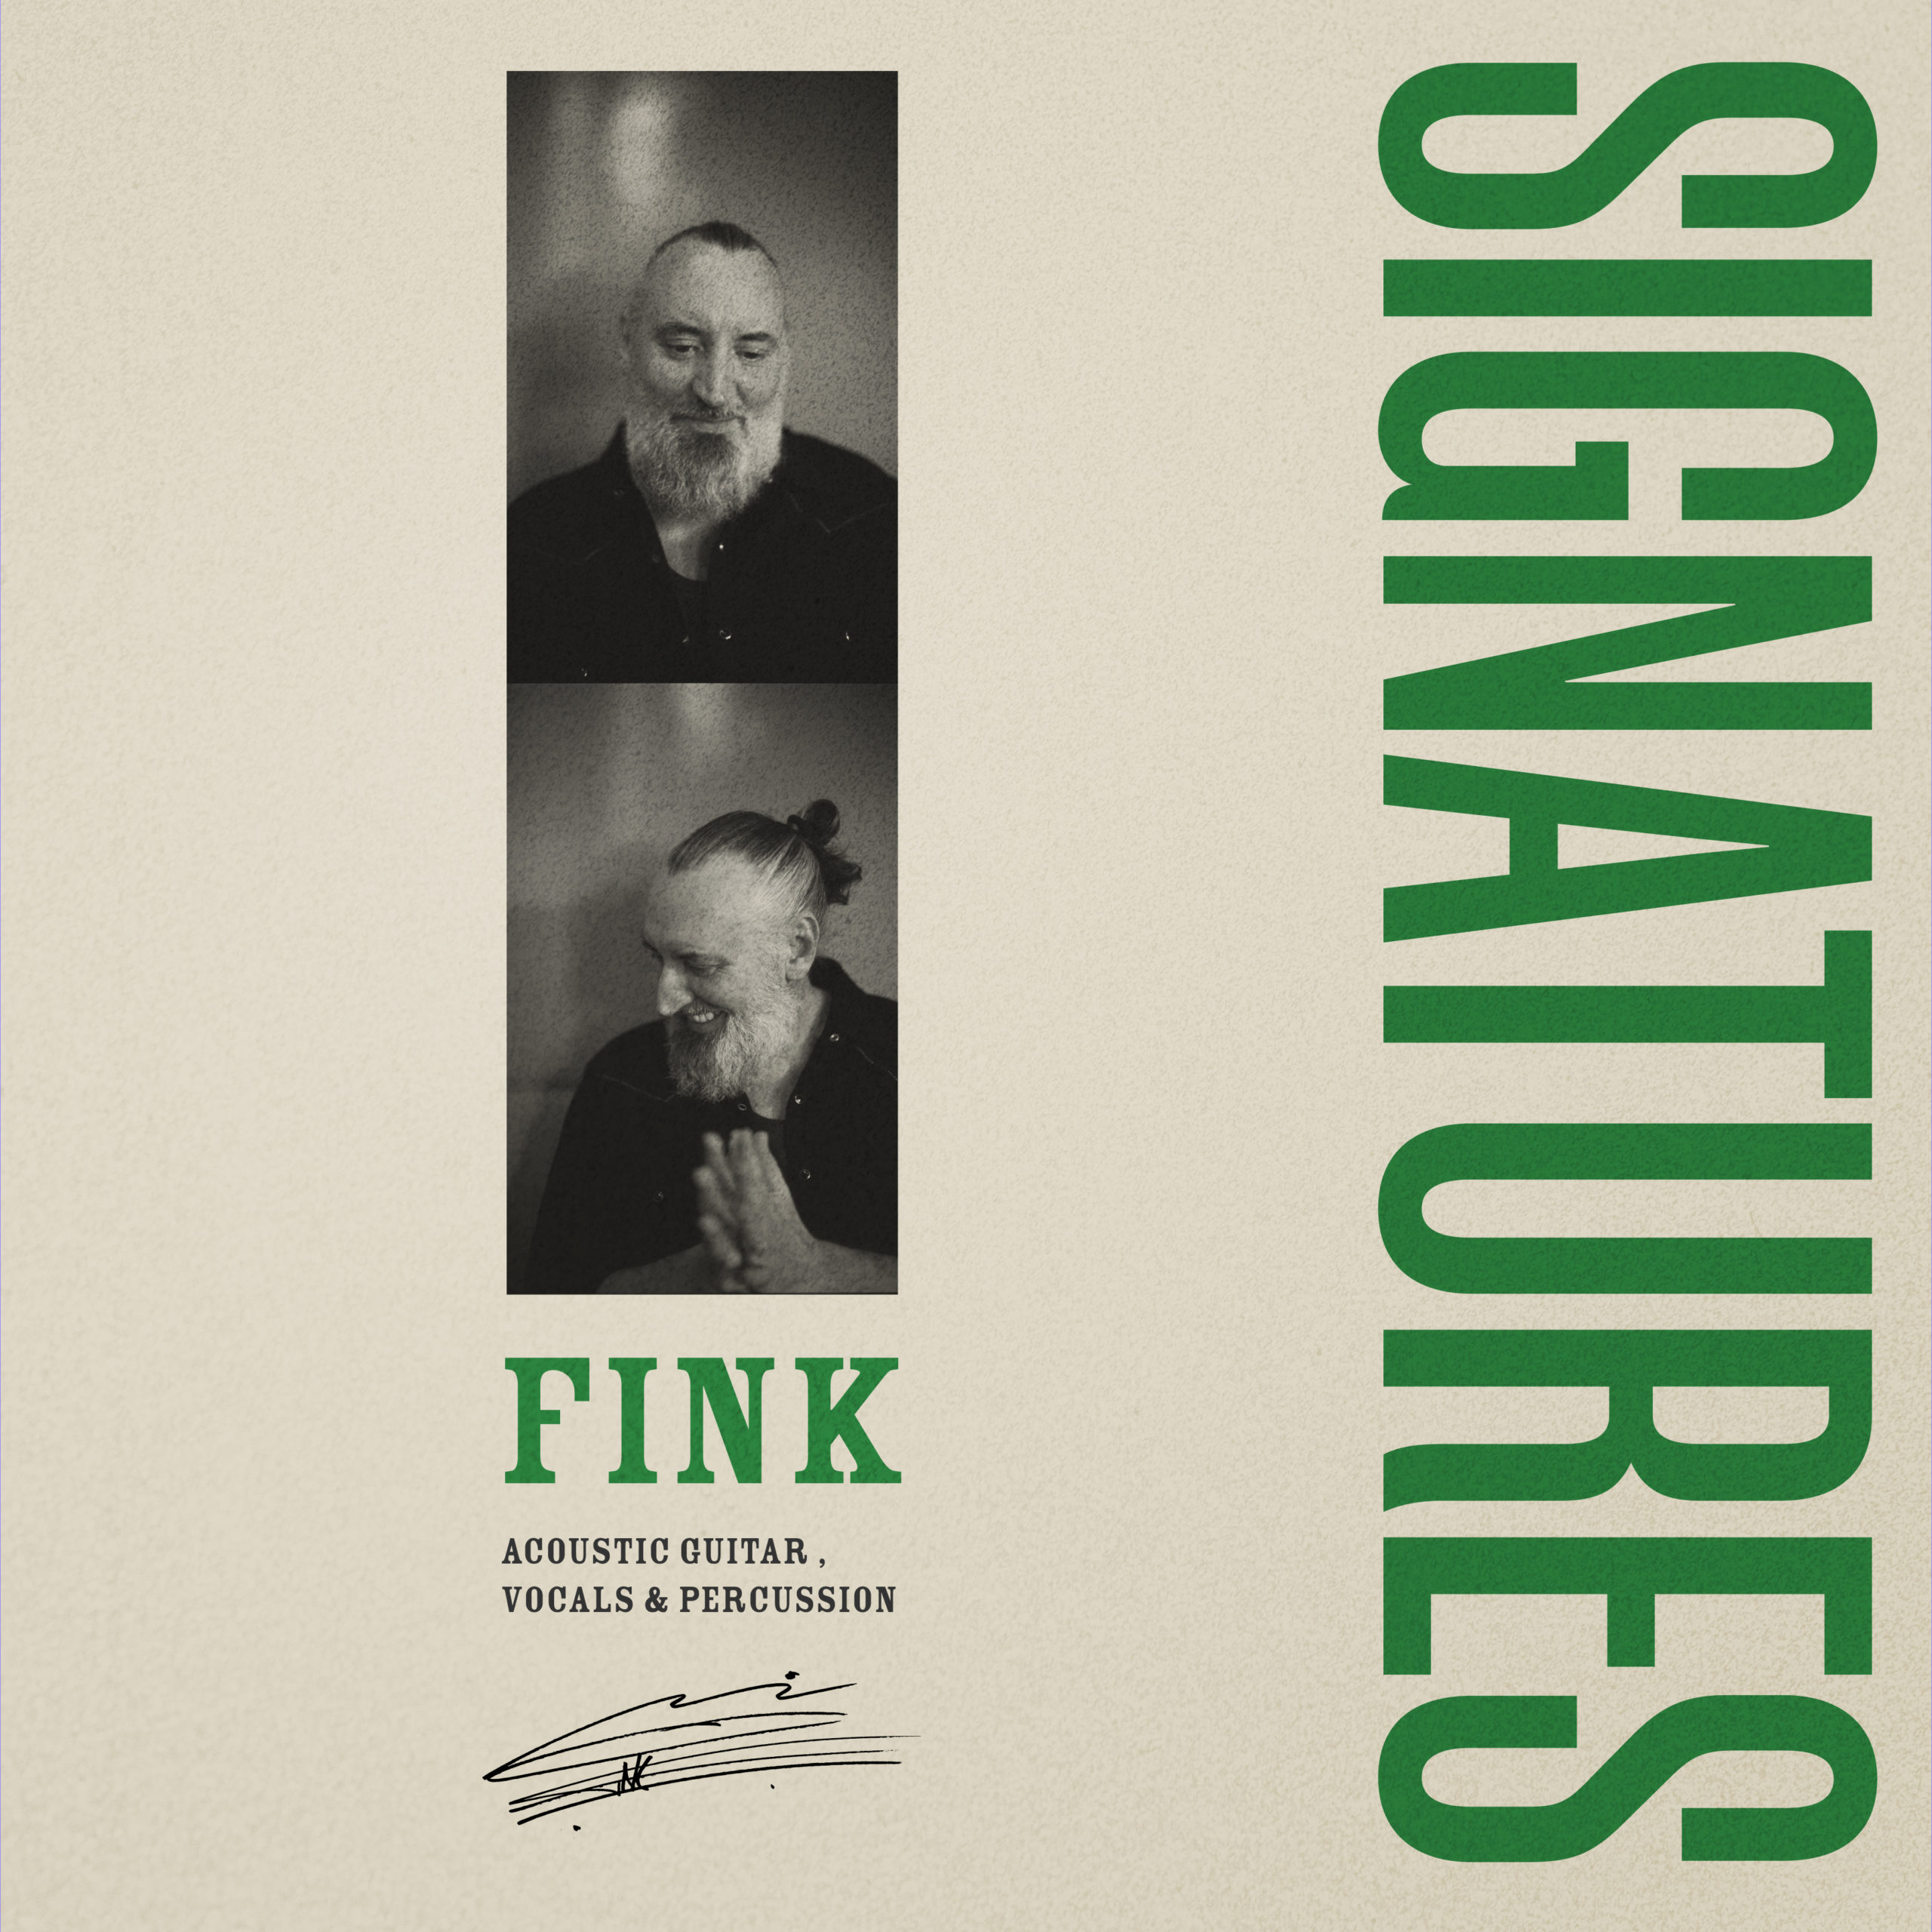 Review of FINK – SIGNATURES: A Definitive Acoustic Guitar Toolkit with Signature Sound